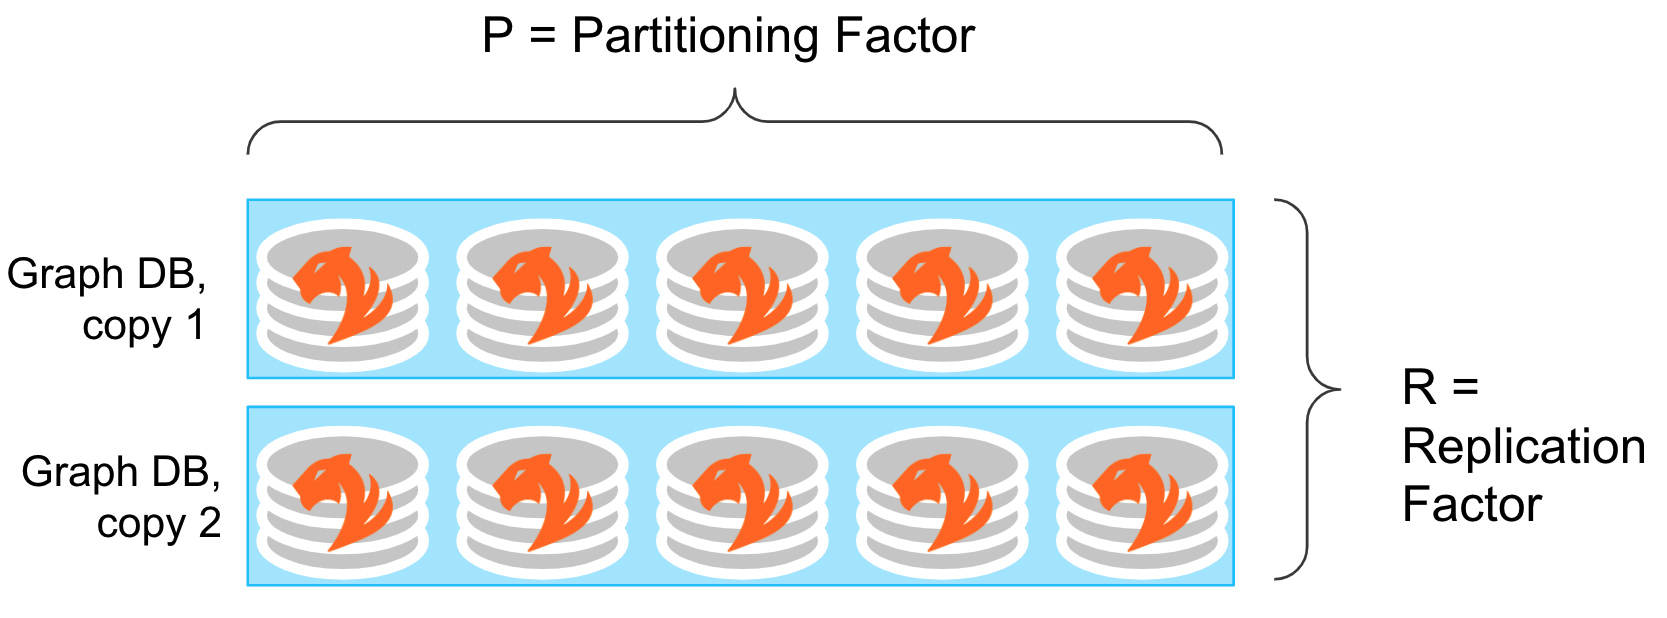 Diagram explaining the mathematical relationship between the partitioning and replication factors and the number of machines in the cluster.